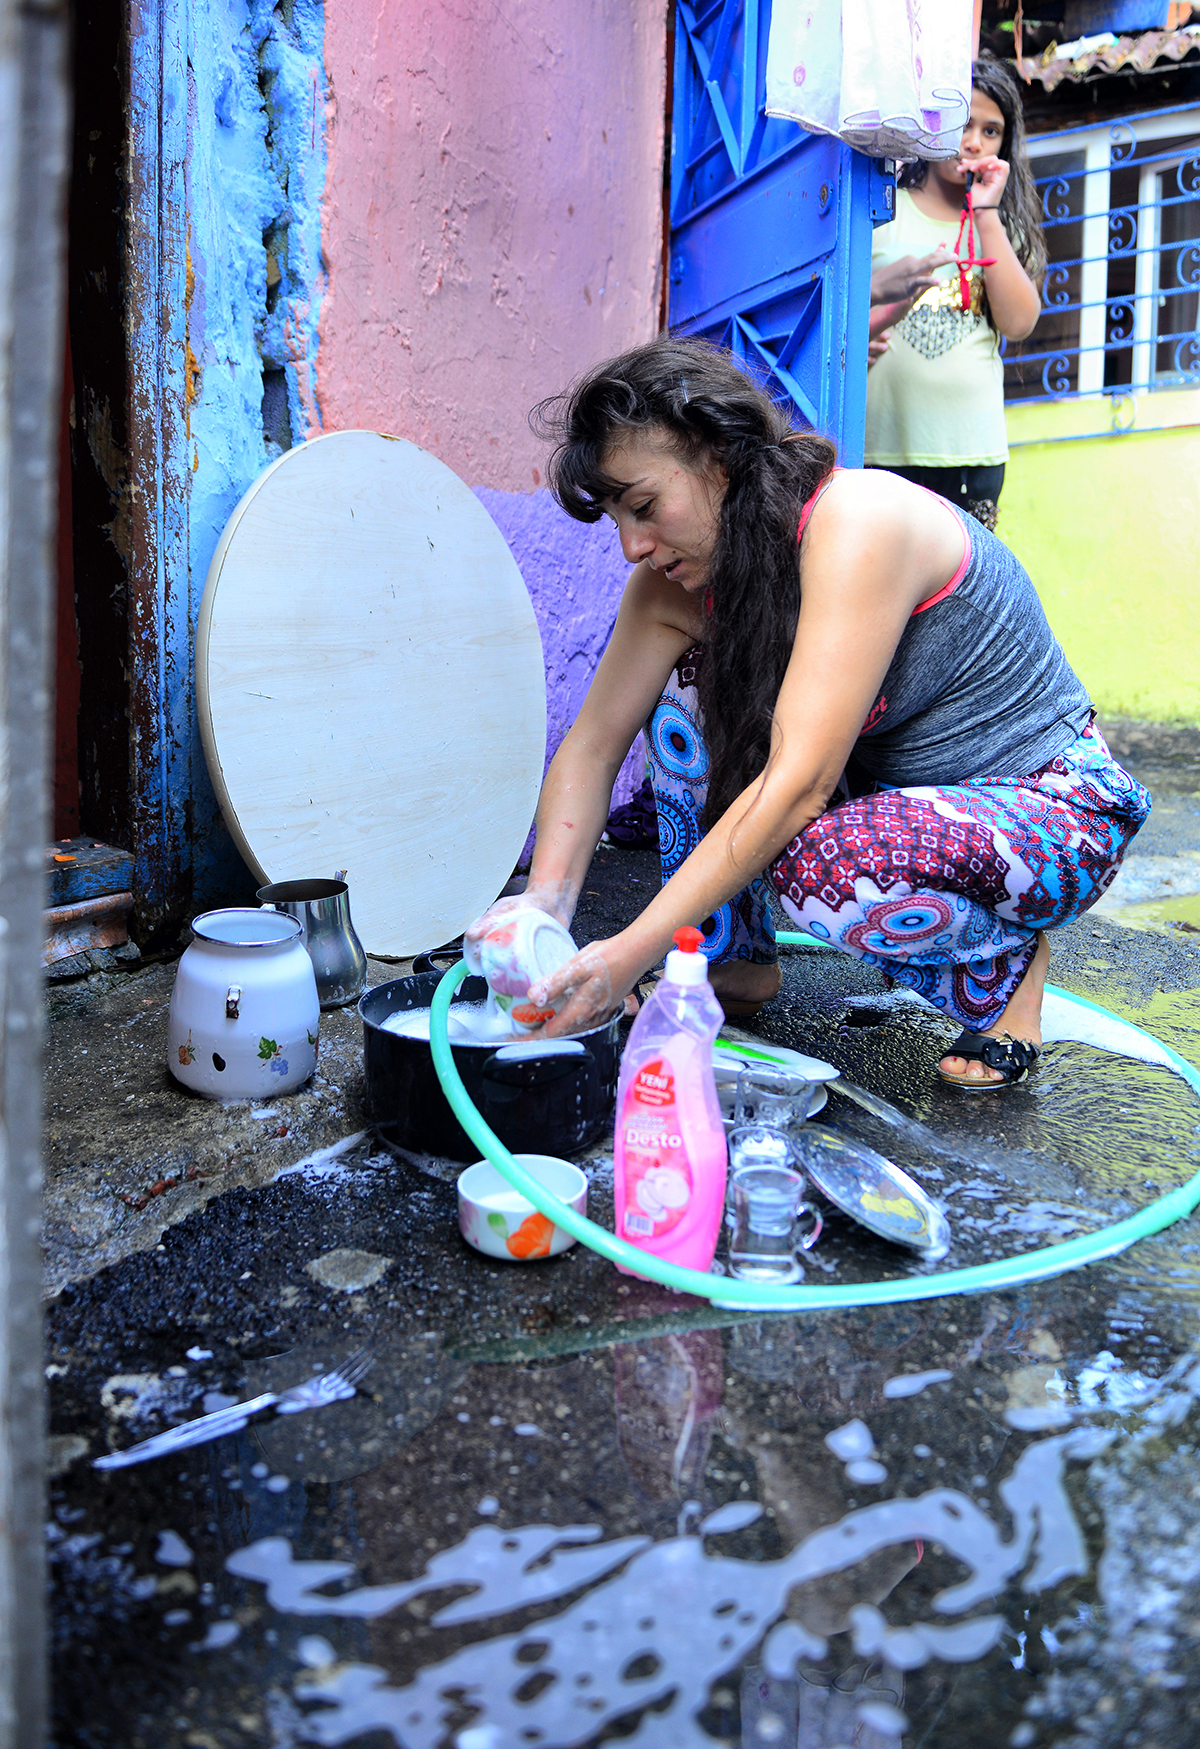 Day 242 —Sarıyer - 
A woman washing dishes on the street.